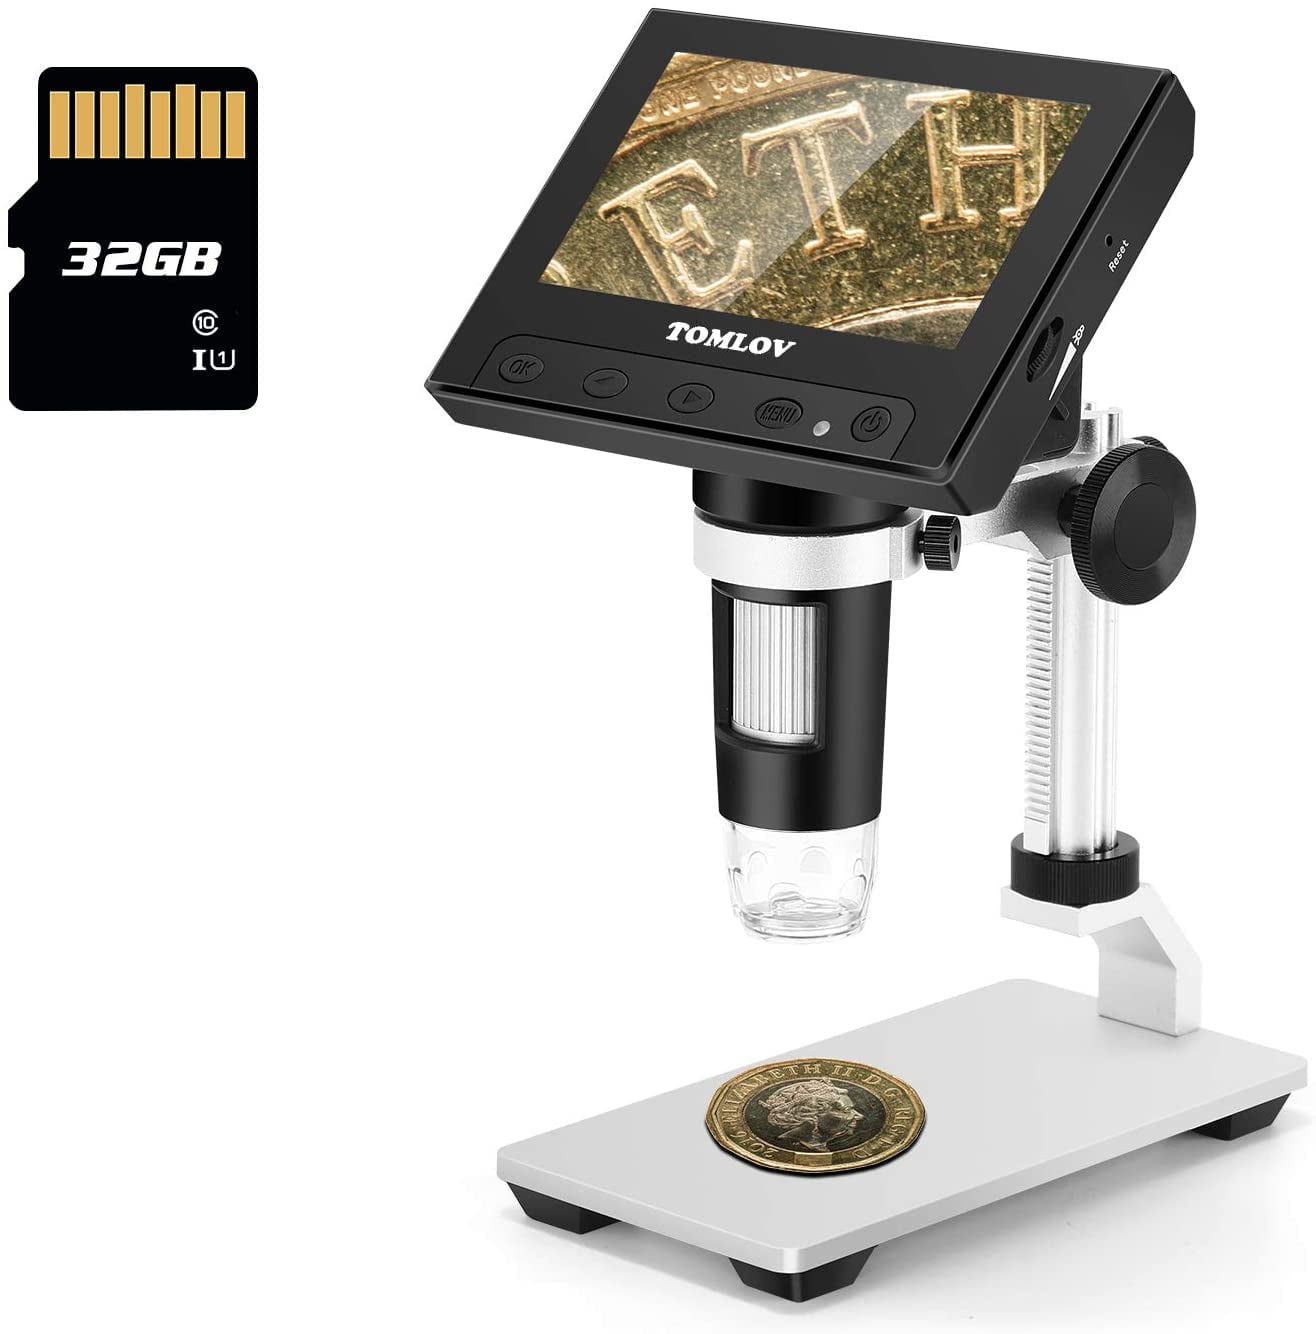 for Experiments Reliable Performance Small Size Easy To Use Digital Microscope WIFI Microscope